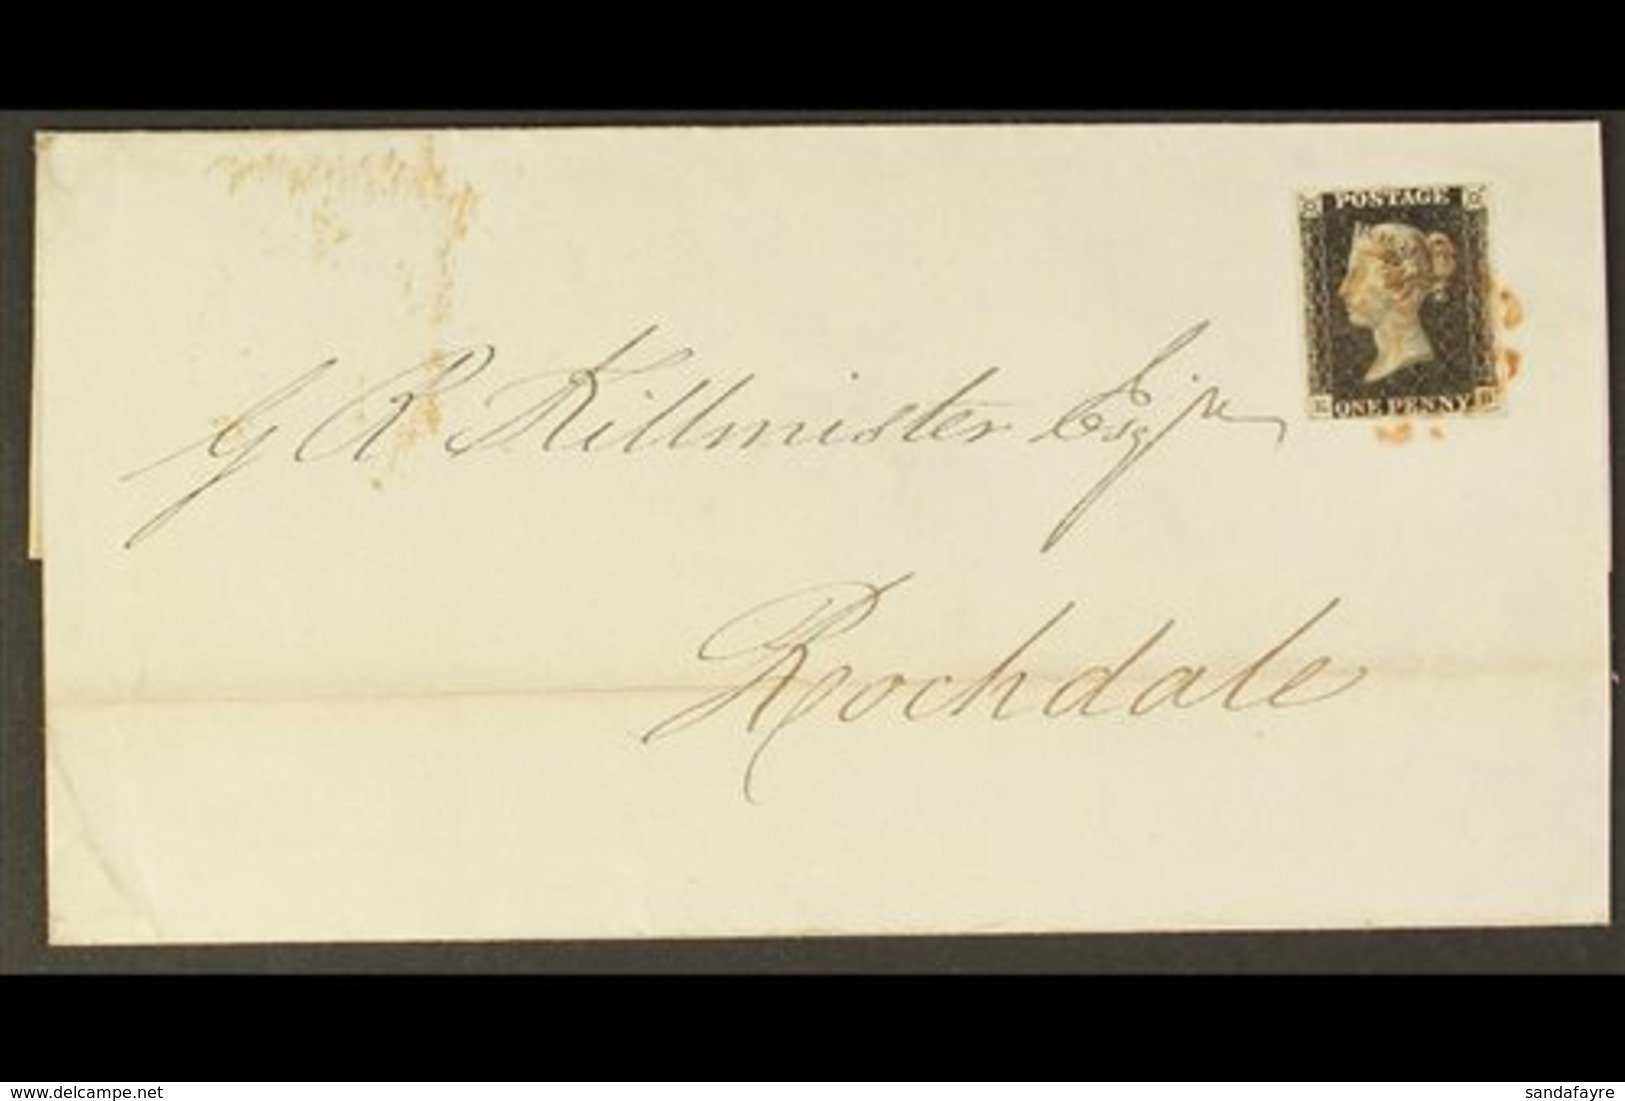 1841  (Jan 13) Cover From Liverpool To Rochdale Bearing 1d Black 'EB', Plate 5, 4 Clear To Good Margins, Tied By Red Mal - Unclassified